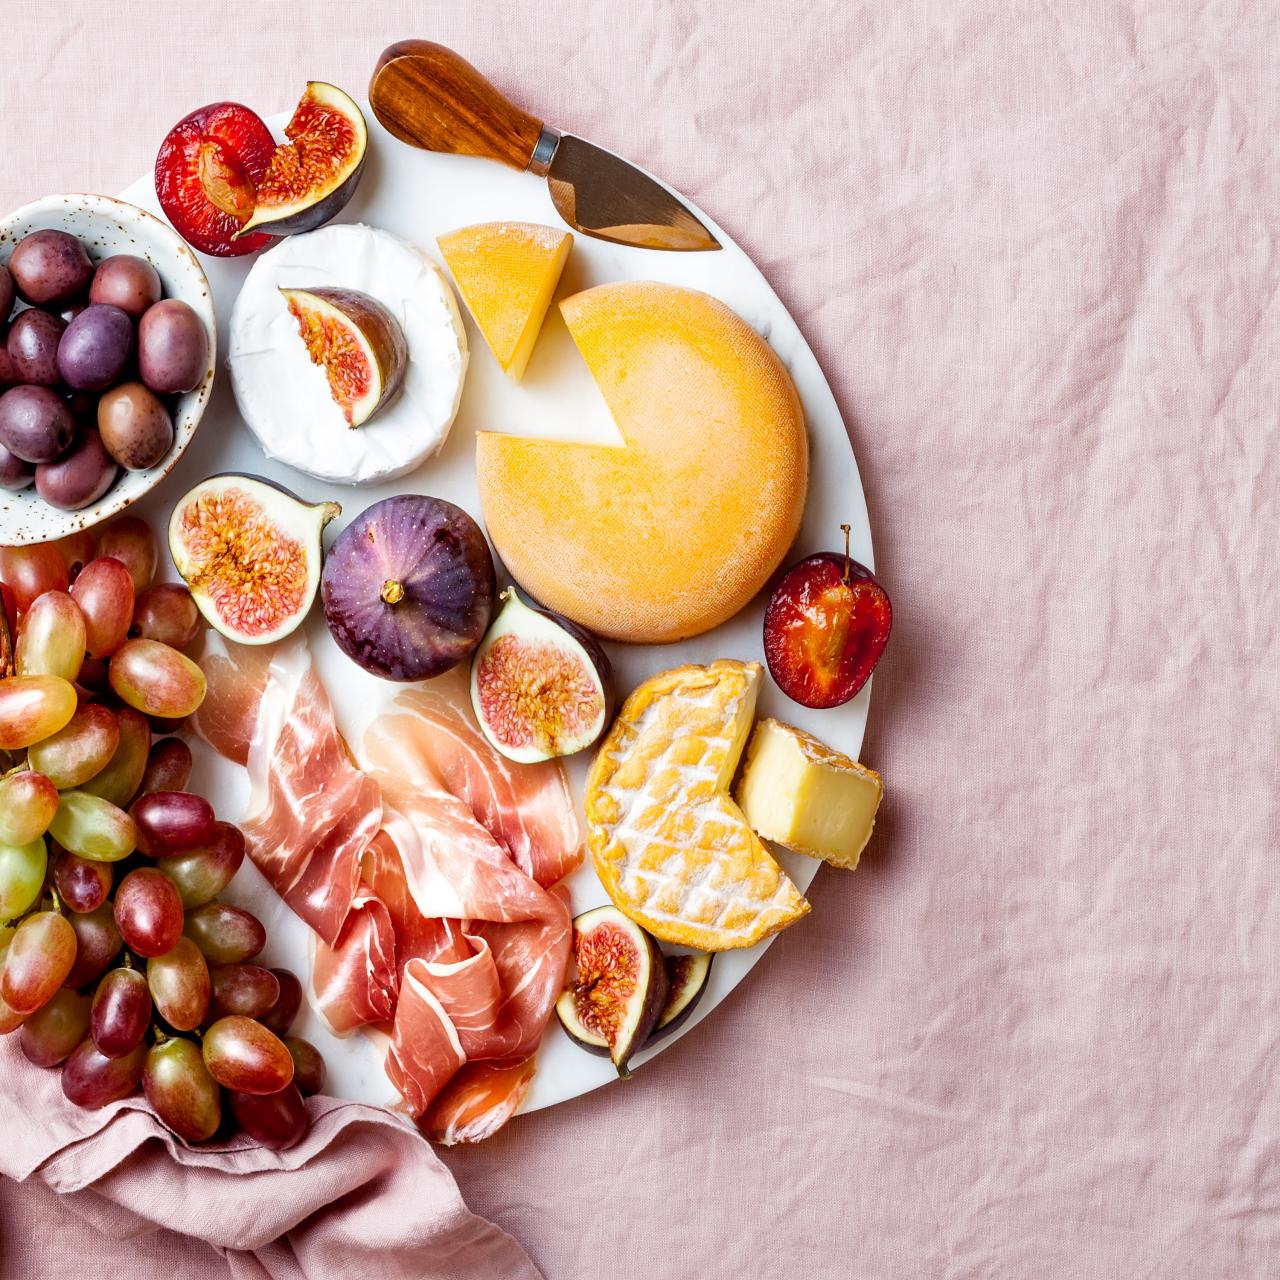 How to Make a Charcuterie Board for One Person